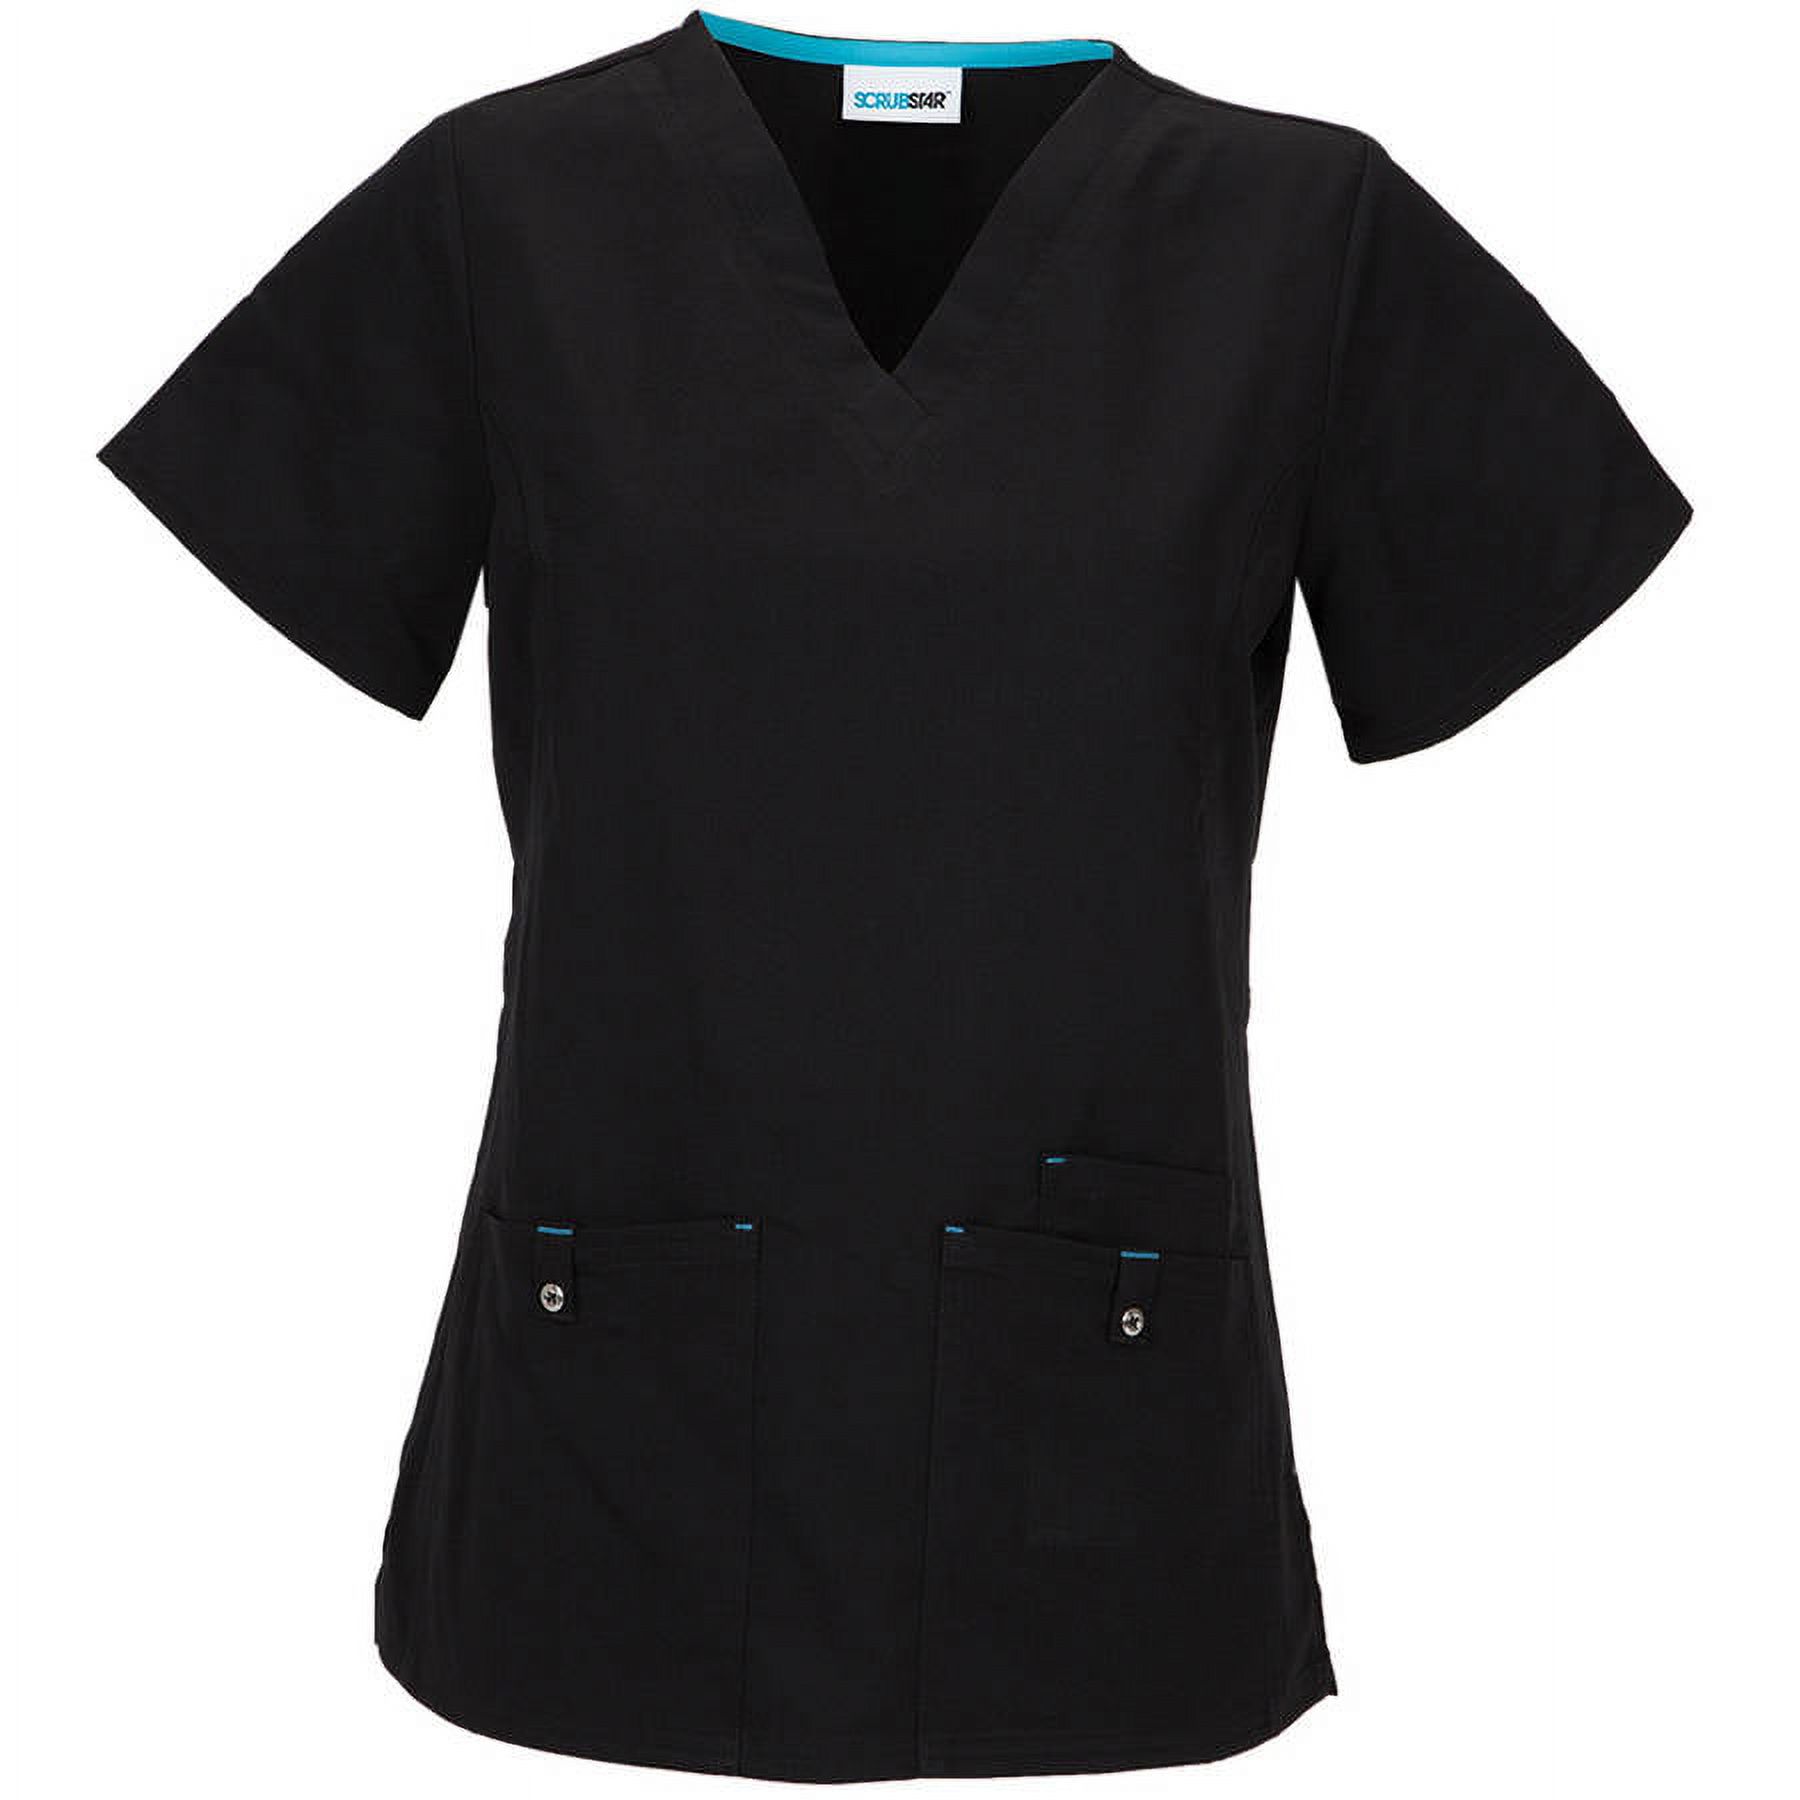 Women's Premium Collection Stretch Rayon V-Neck Scrub Top - image 1 of 2